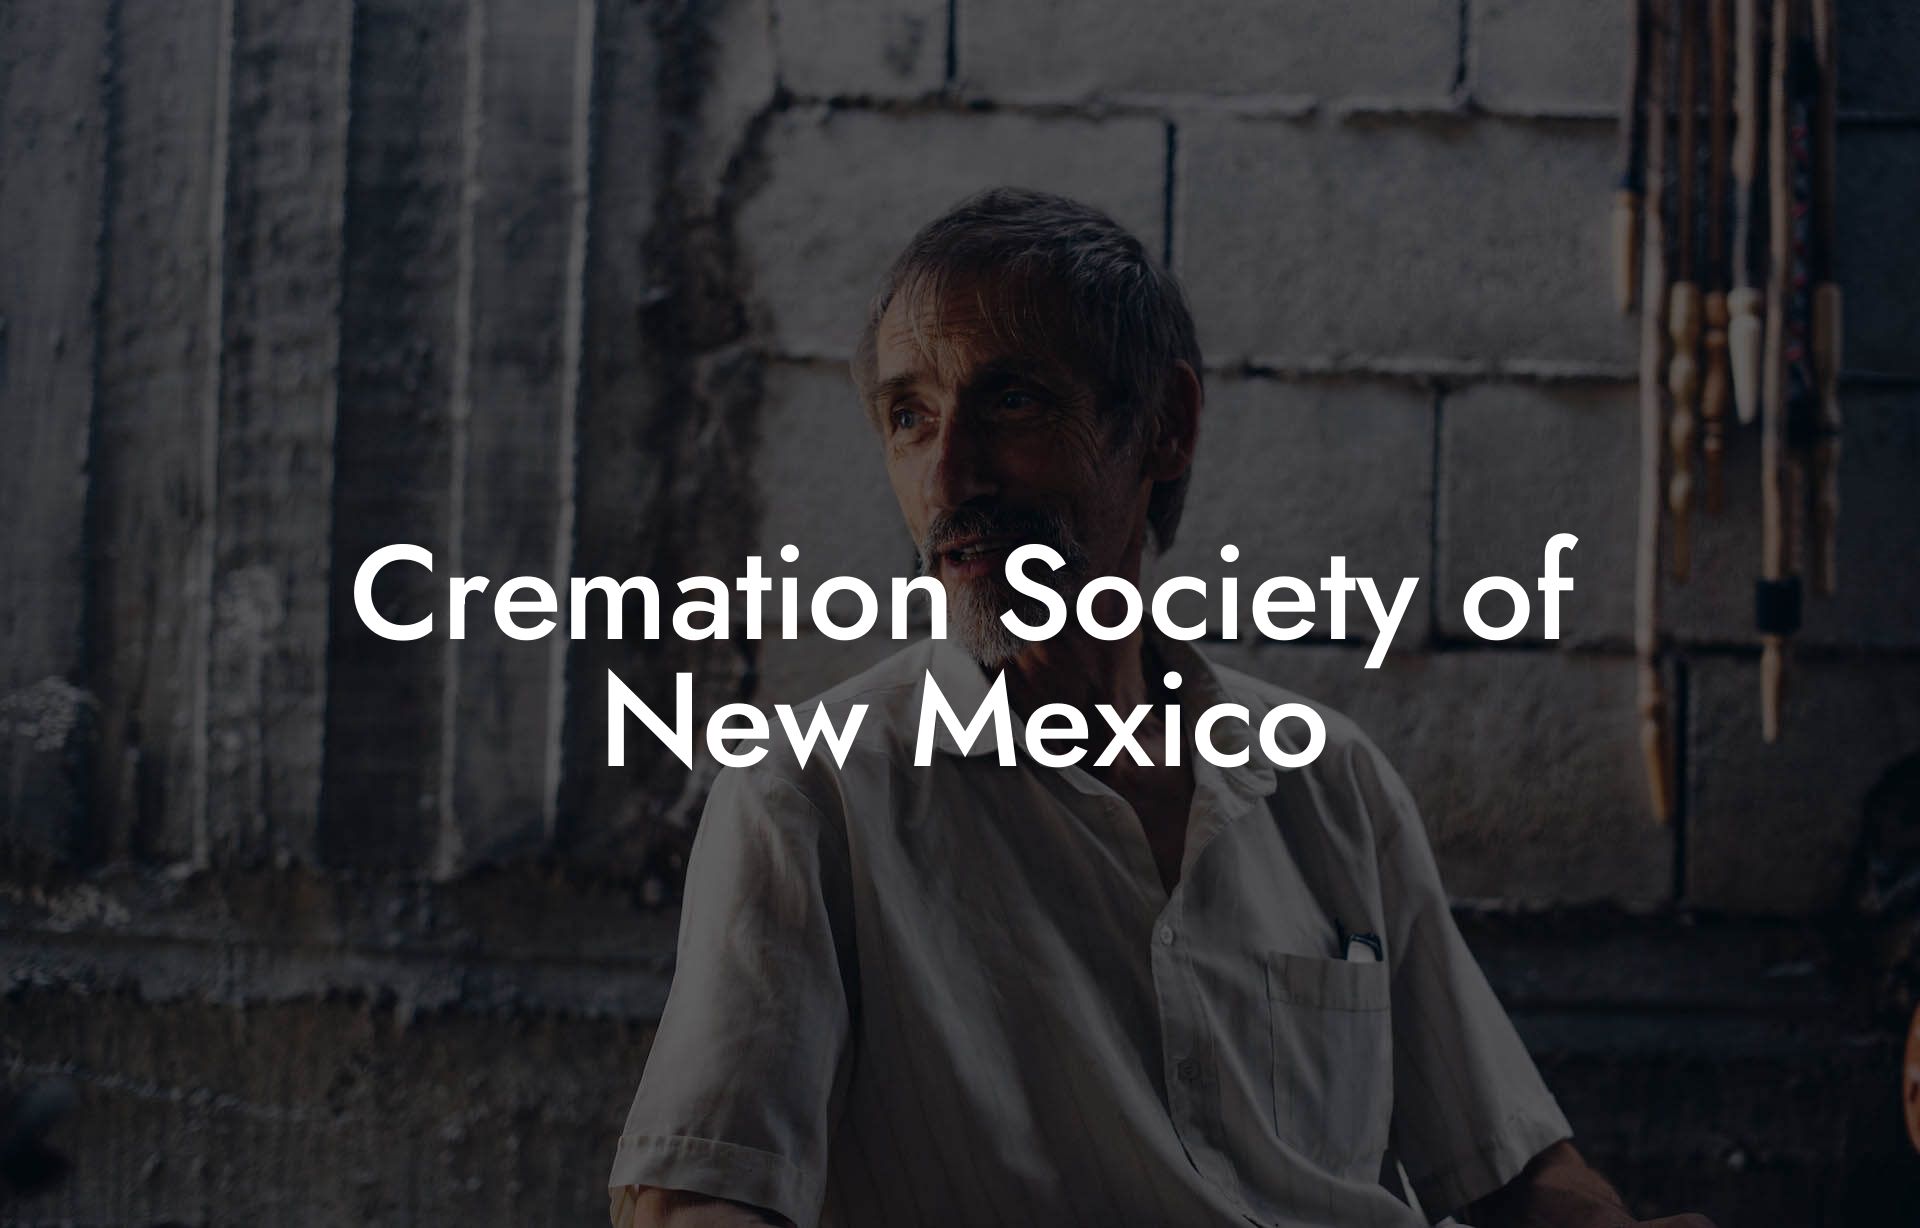 Cremation Society of New Mexico